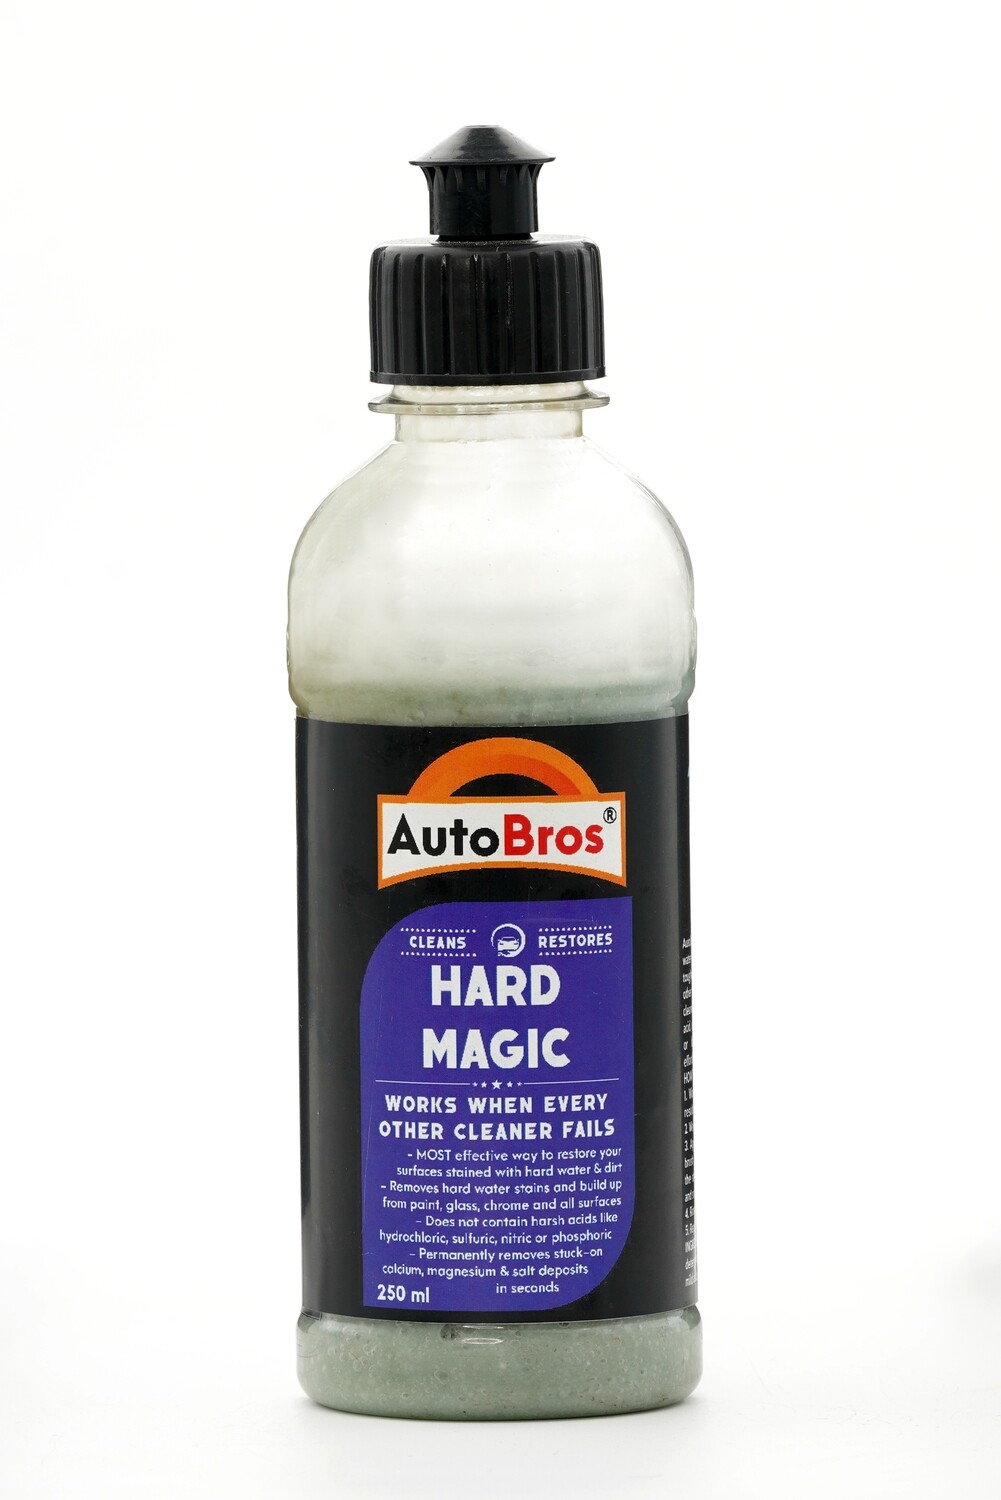 AutoBros Hard Magic 250ml | Removes toughest hard water stains | Works when every other cleaner fails | Safe for metal, glass, glass & painted surfaces